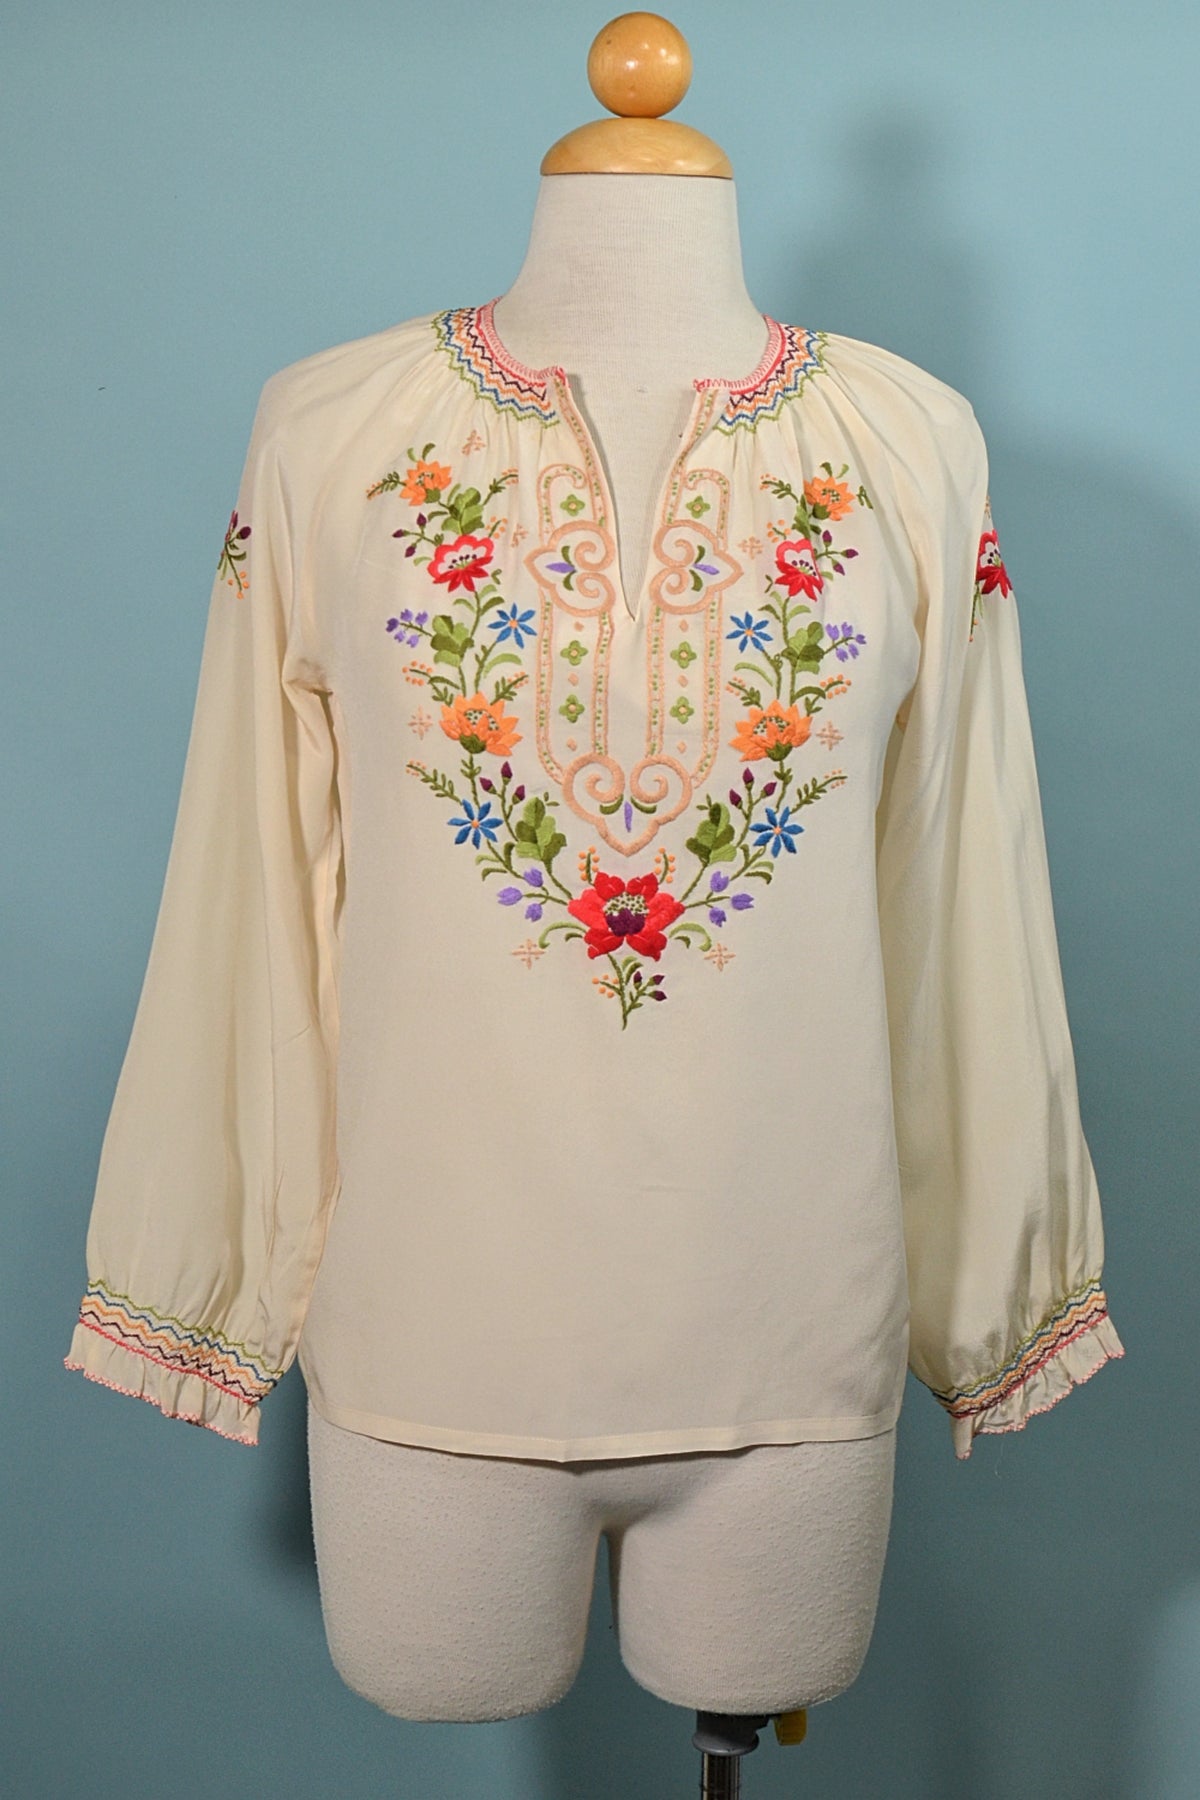 Vintage Embroidered Peasant Blouse, Penny Lane Bohemian Hippie Top